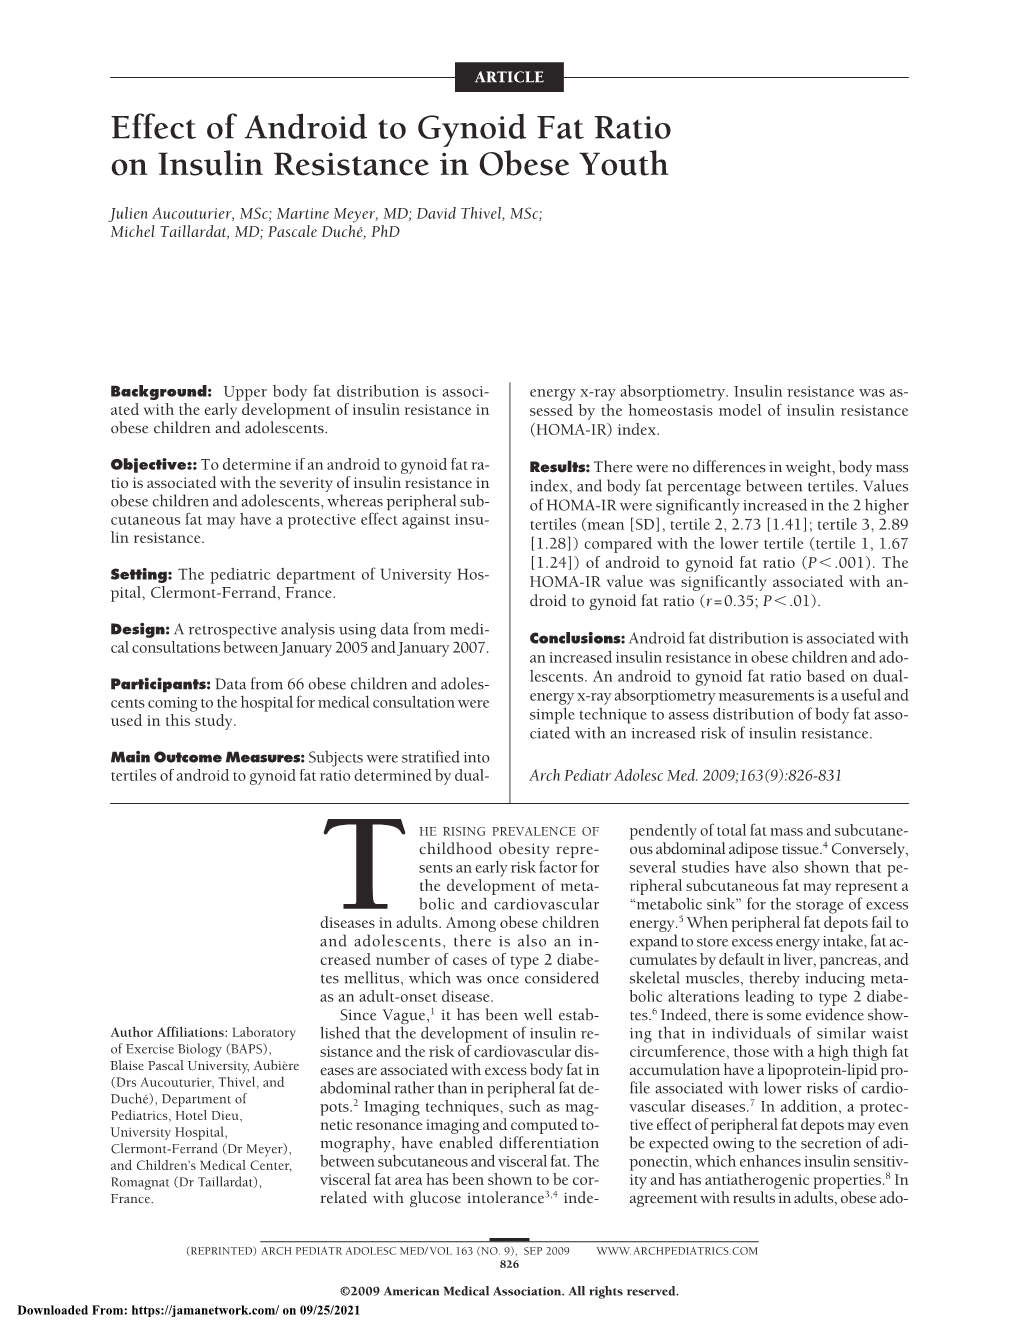 Effect of Android to Gynoid Fat Ratio on Insulin Resistance in Obese Youth